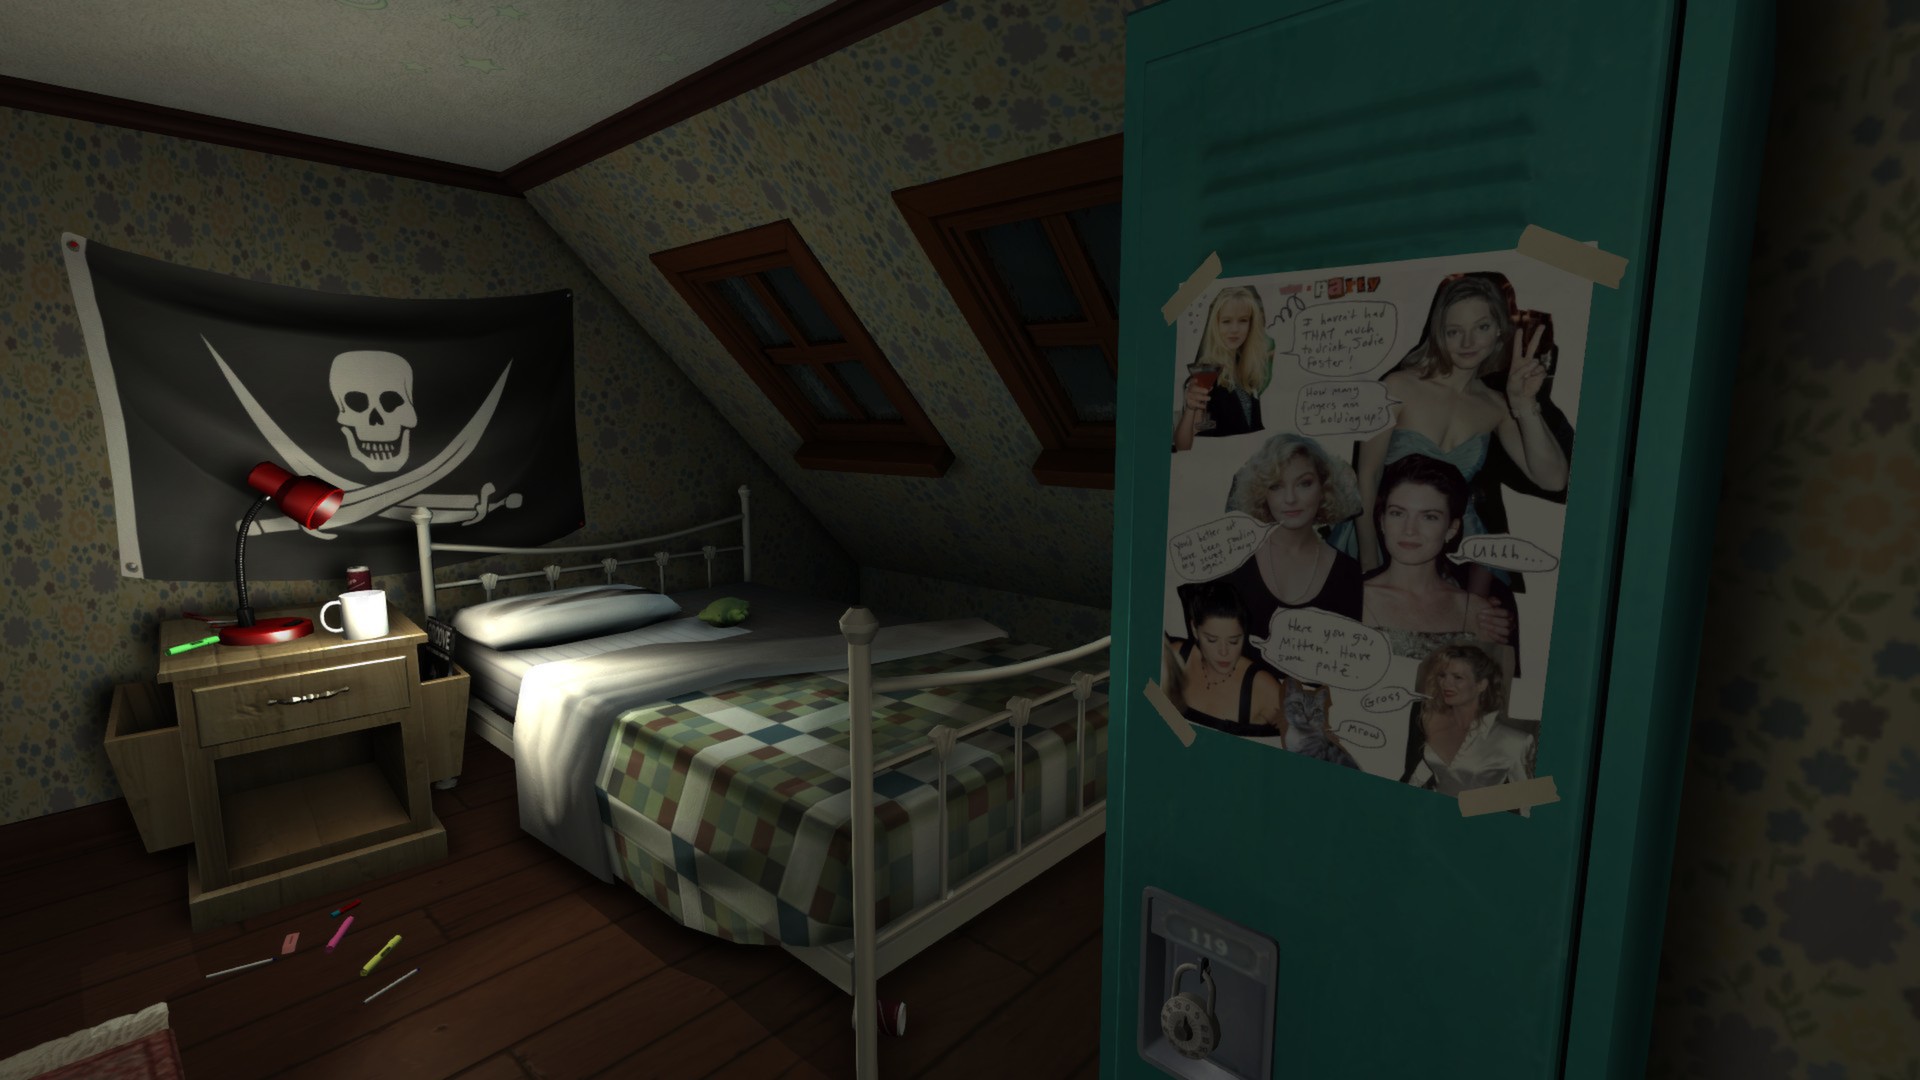 Sam's bedroom with a pirate flag and pictures of girls stuck to her locker.